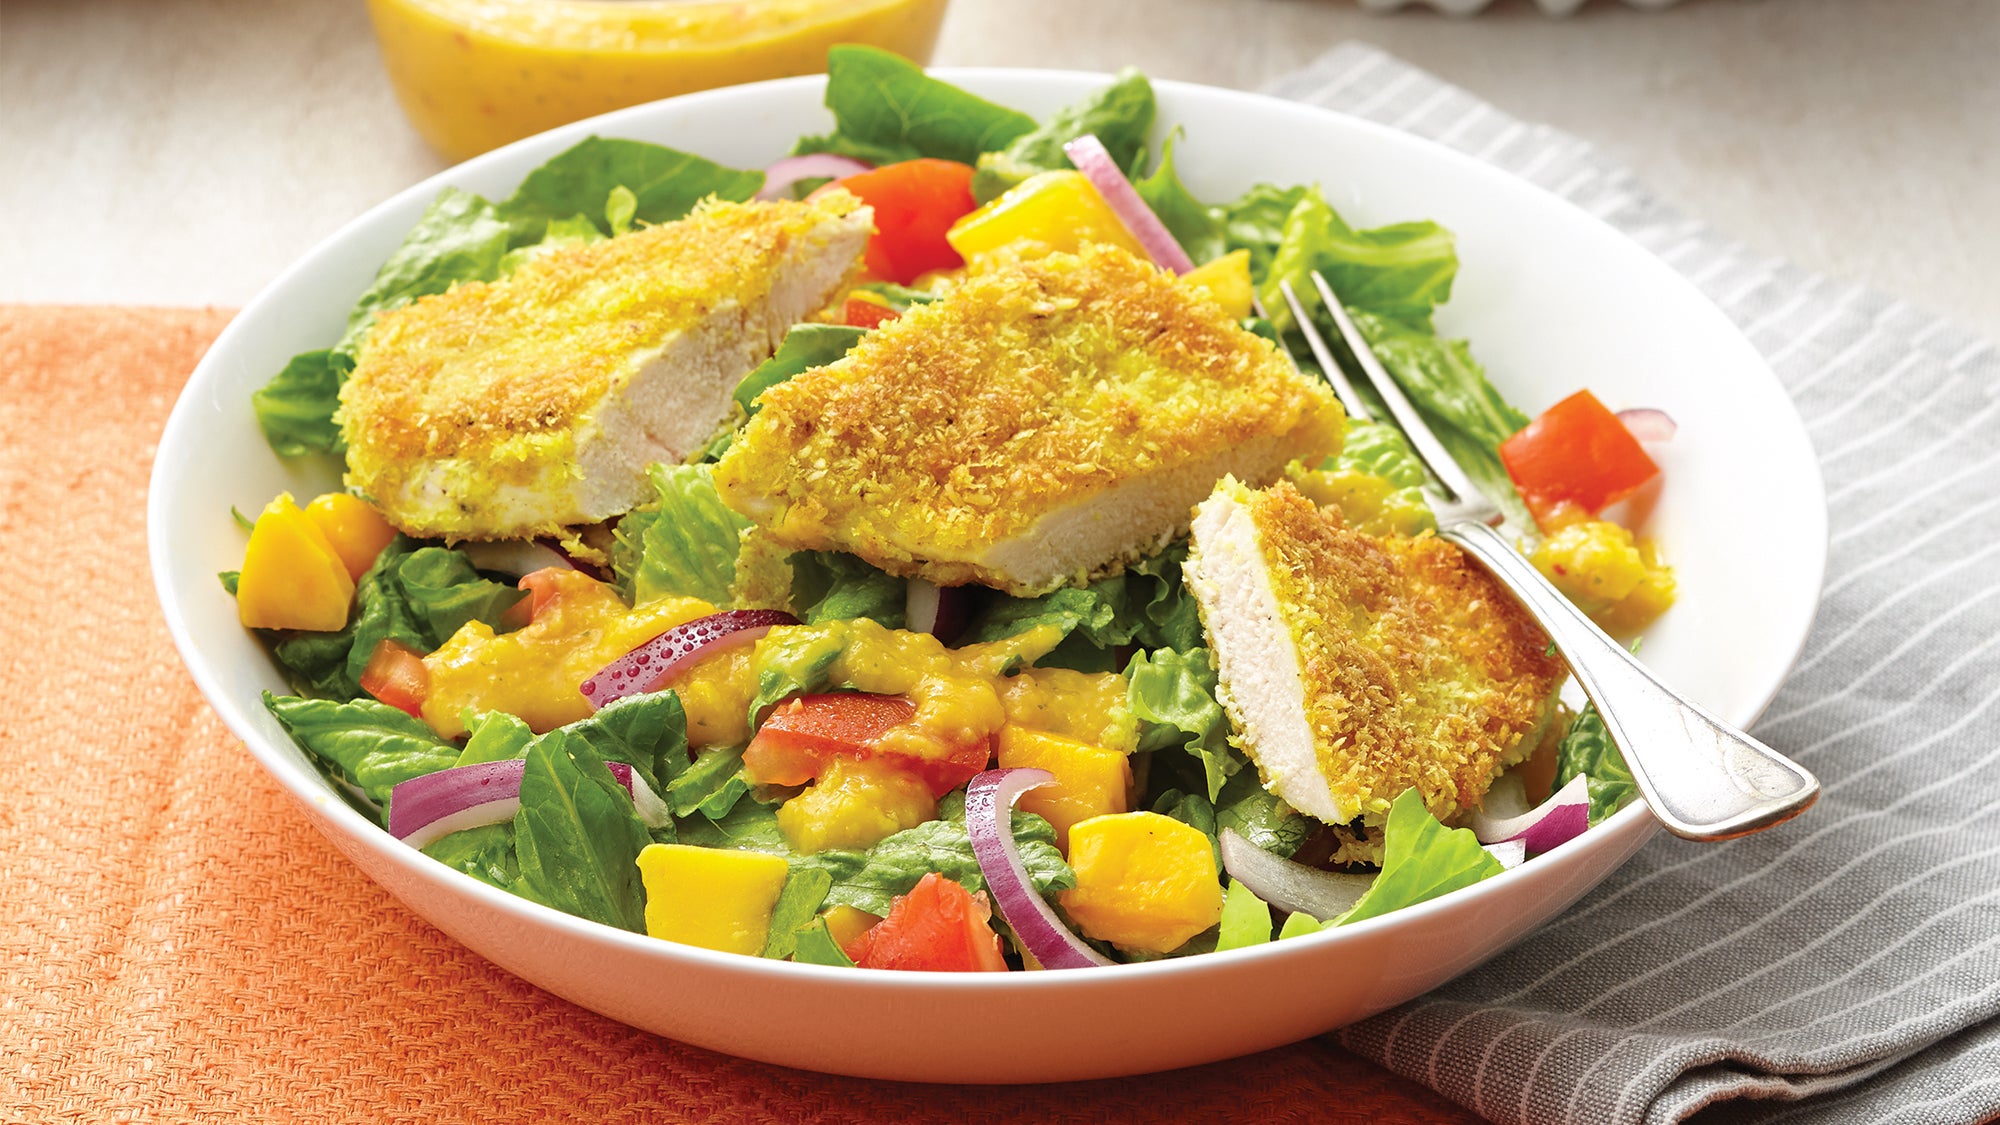 https://cdn.cleaneatingmag.com/wp-content/uploads/2016/05/coconut-currycrusted-chicken-salad-with-mango-dressing-1.jpg